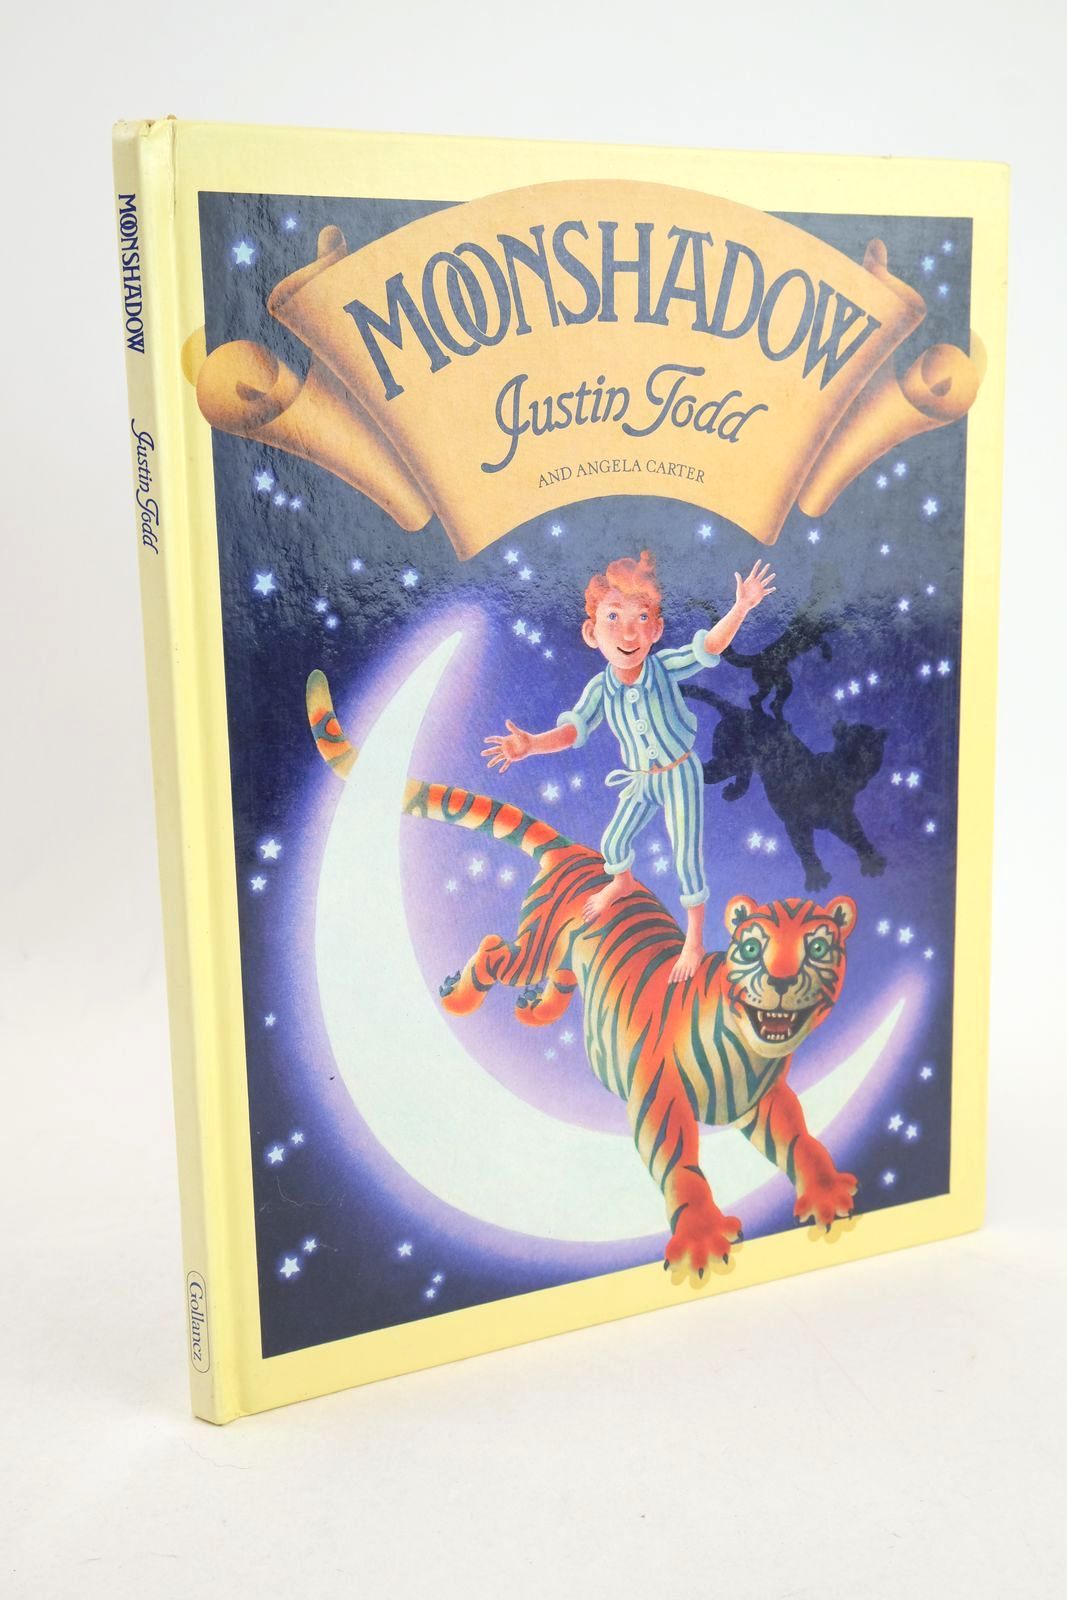 Photo of MOONSHADOW written by Carter, Angela illustrated by Todd, Justin published by Victor Gollancz Ltd. (STOCK CODE: 1327482)  for sale by Stella & Rose's Books